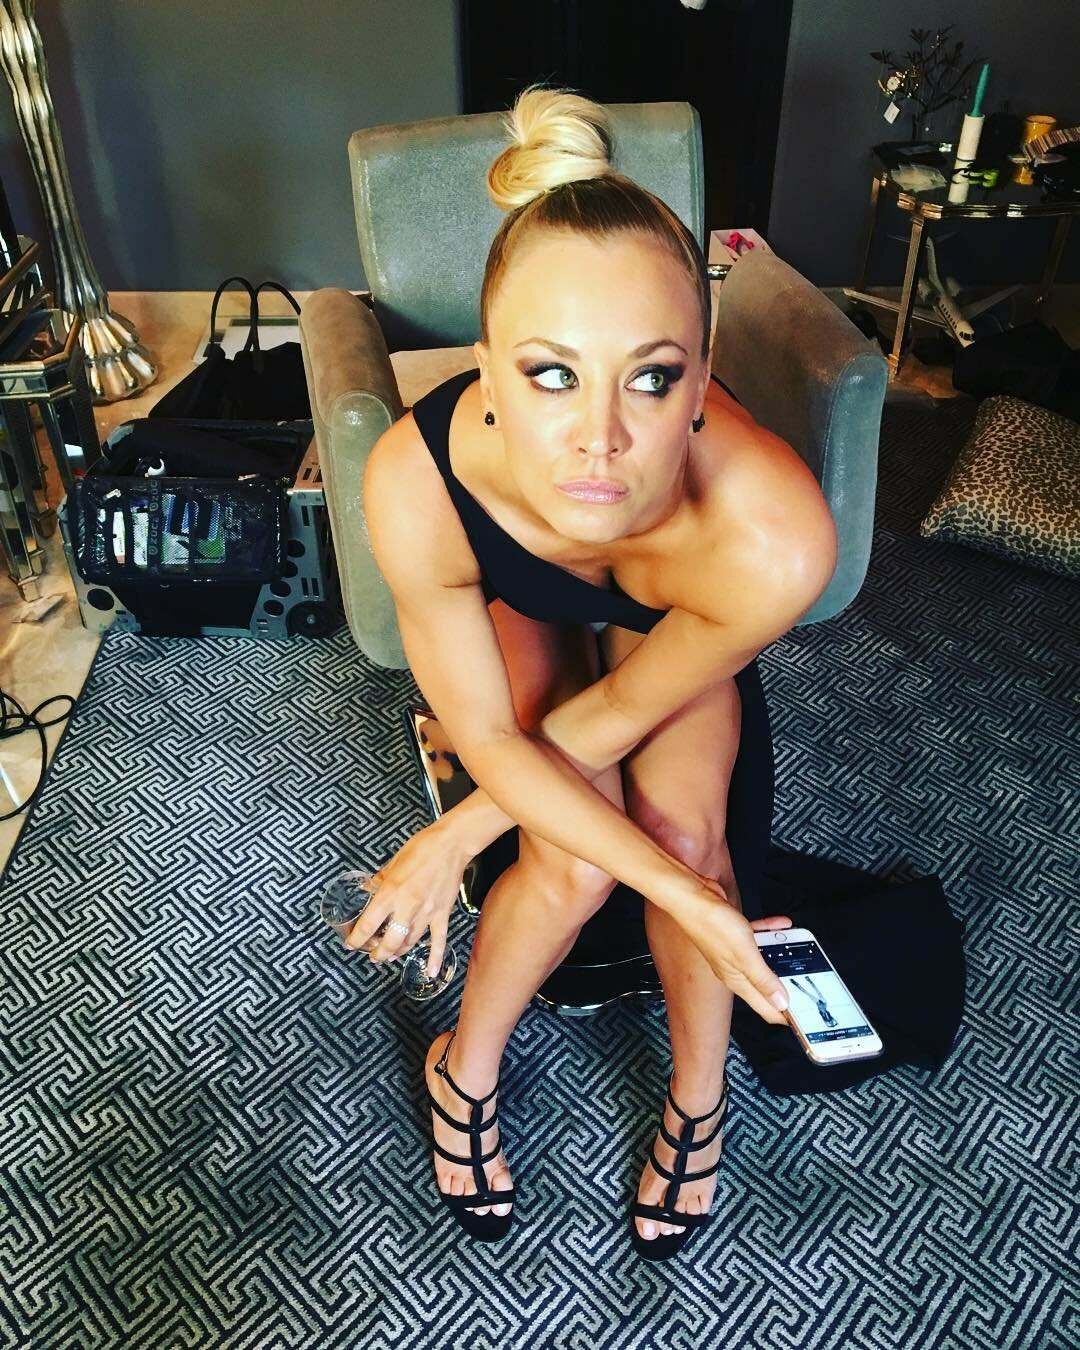 Kaley Cuoco is impatiently waiting for you to grab her by her hair and shove your cock between those lips